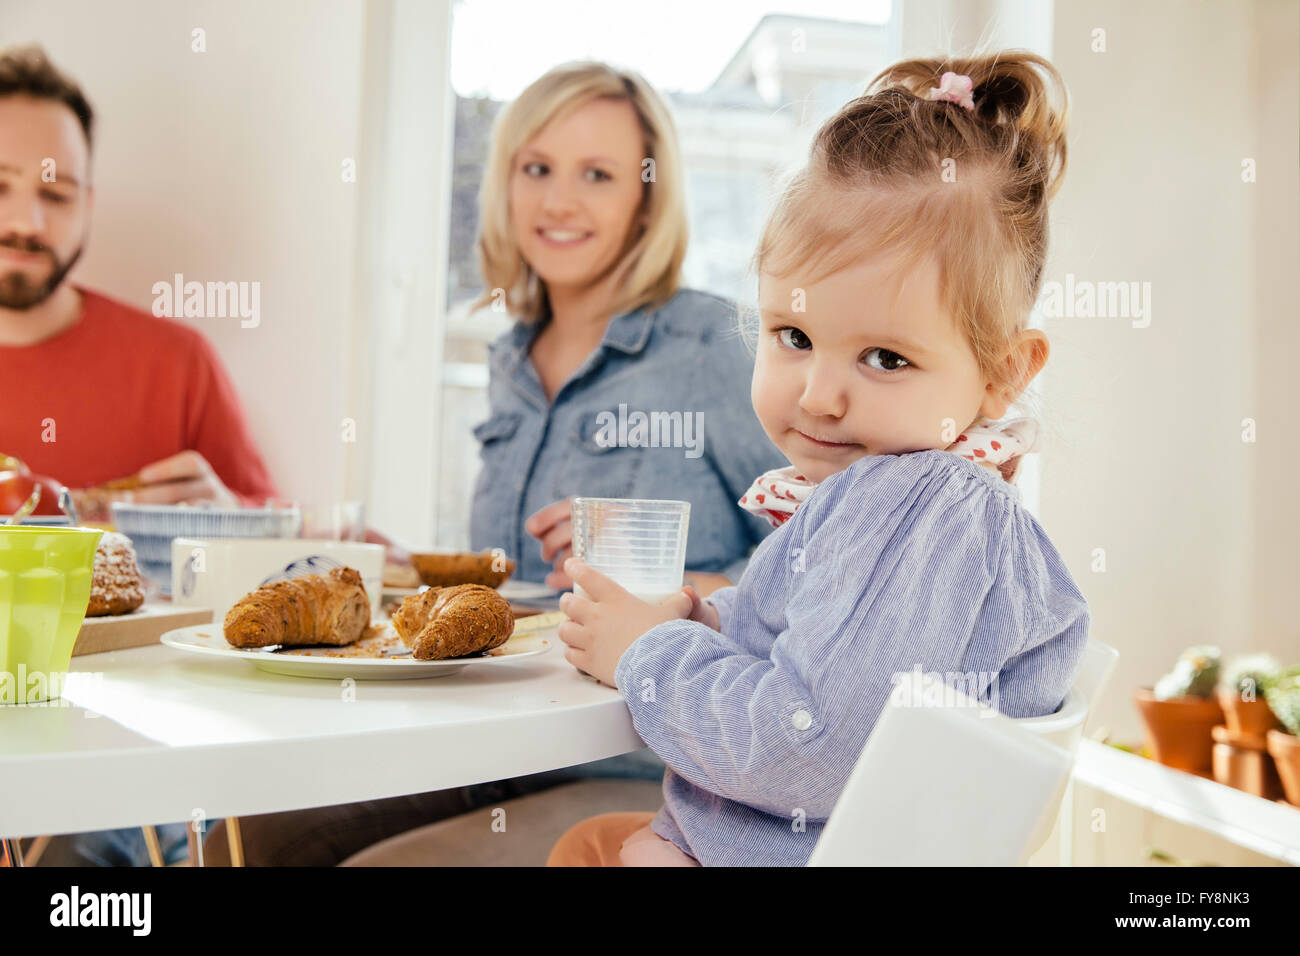 Portrait of little girl with glass of milk at breakfast table Stock Photo